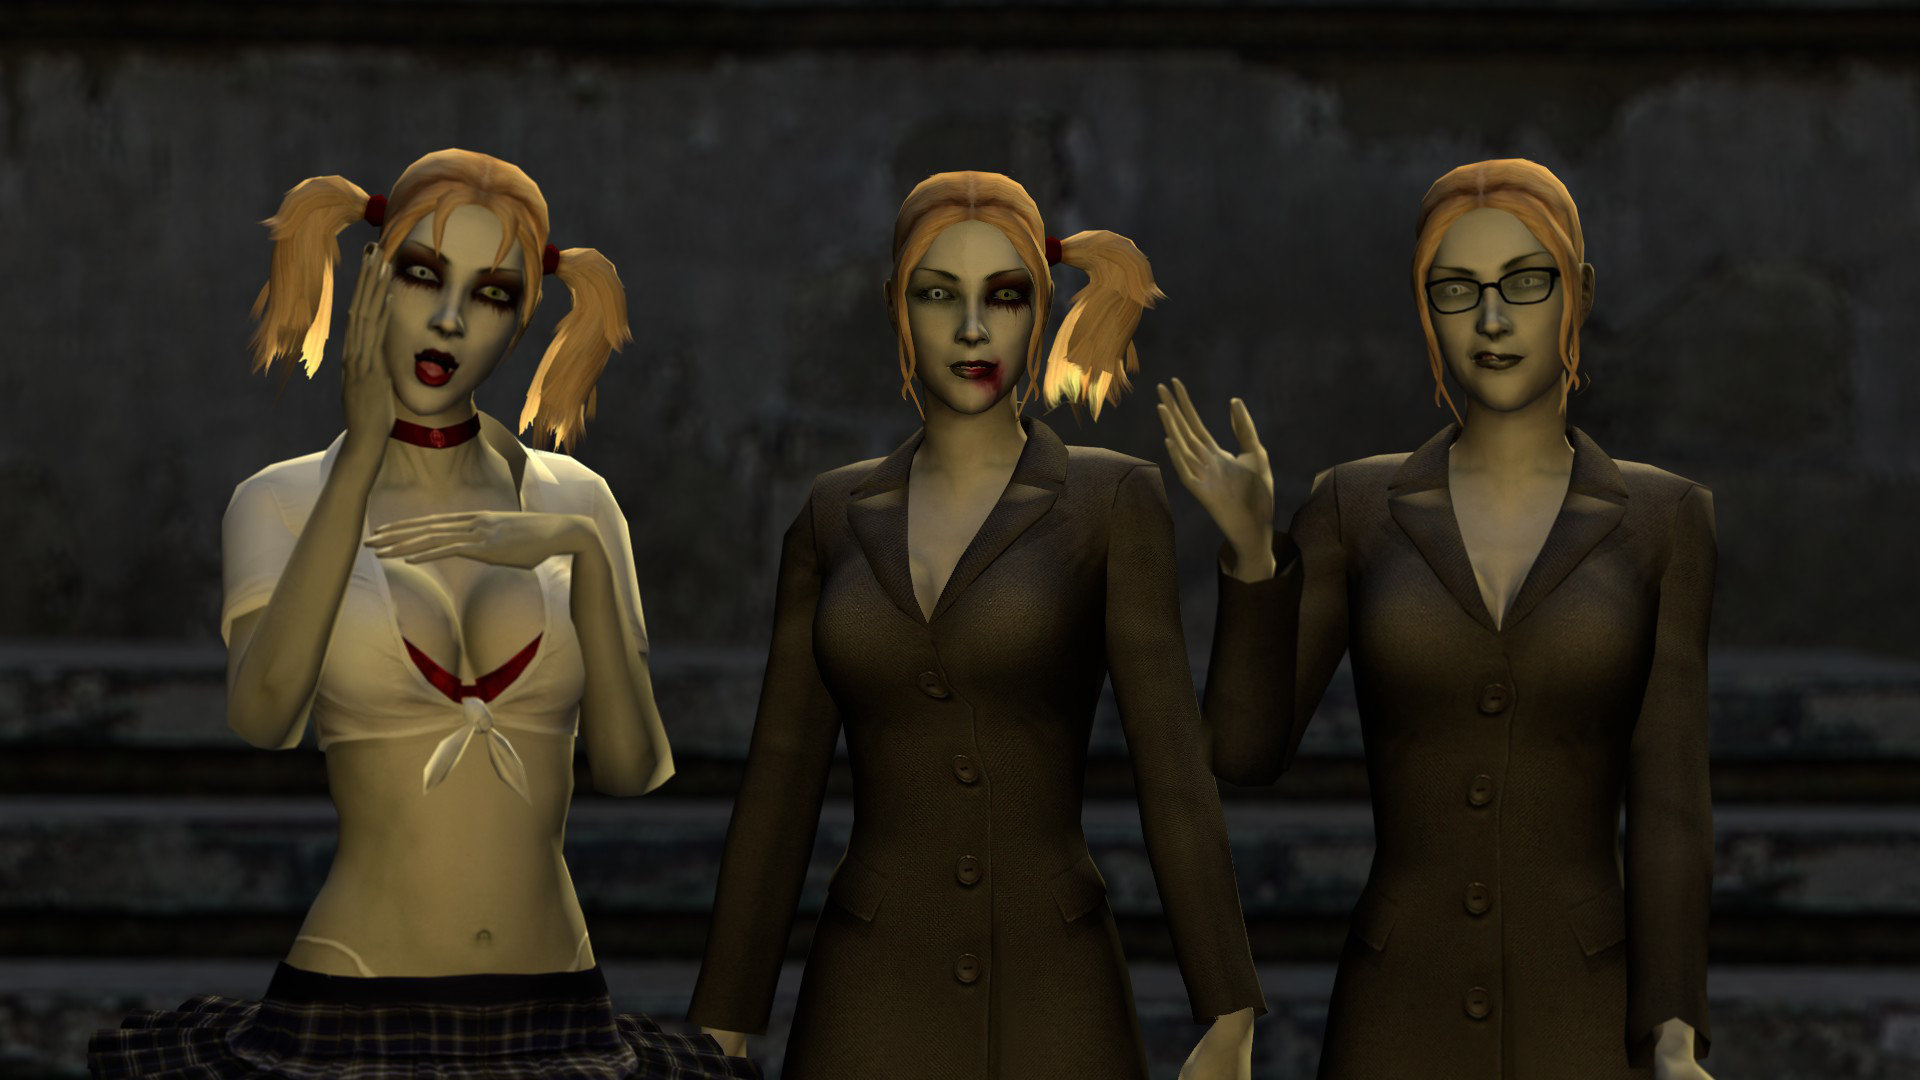 Jeanette skin for PC addon - Vampire: The Masquerade – Bloodlines - ModDB